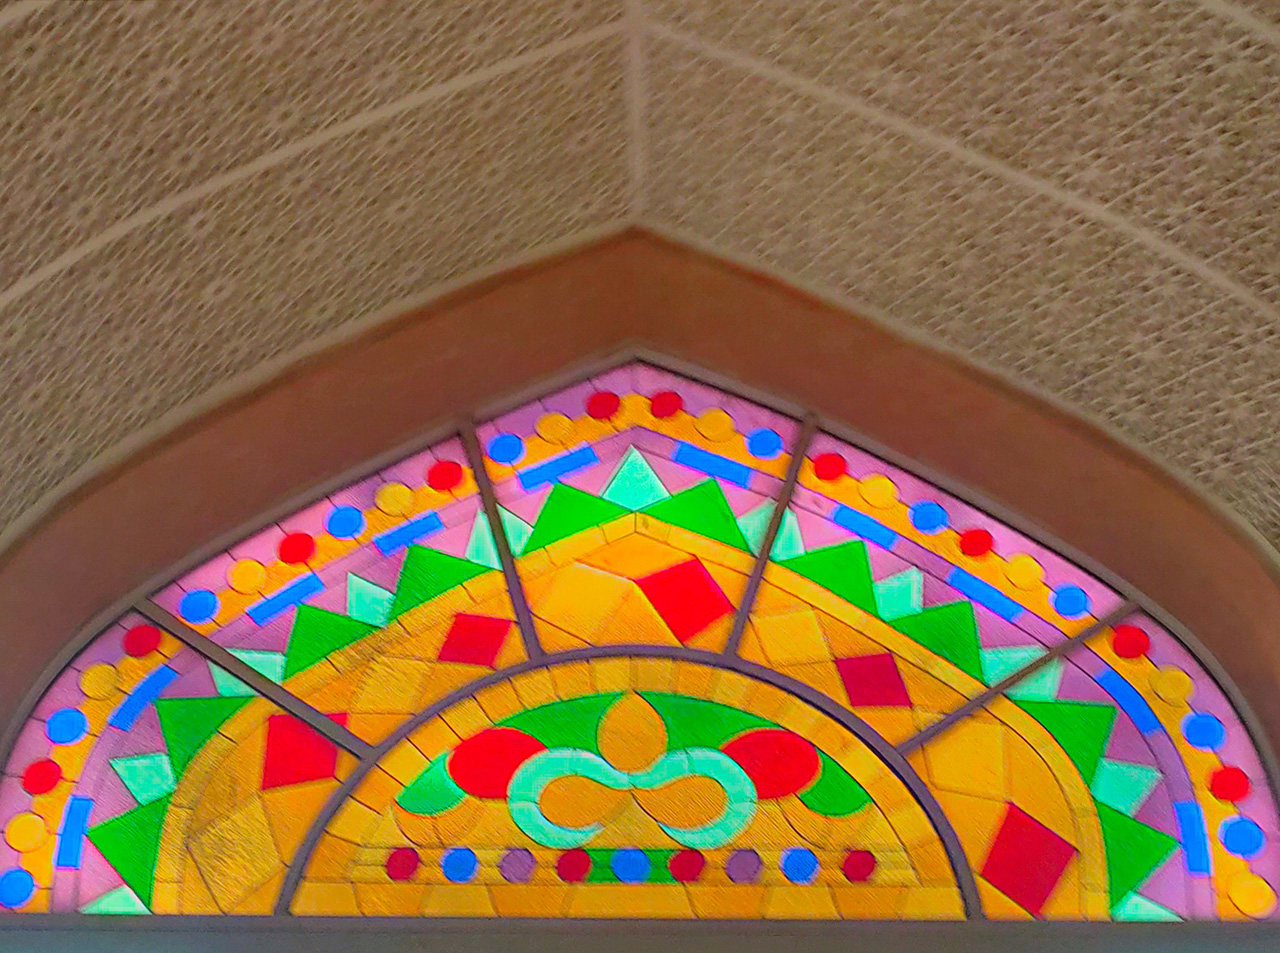 Stained Glass Artwork at Mutrah Corniche